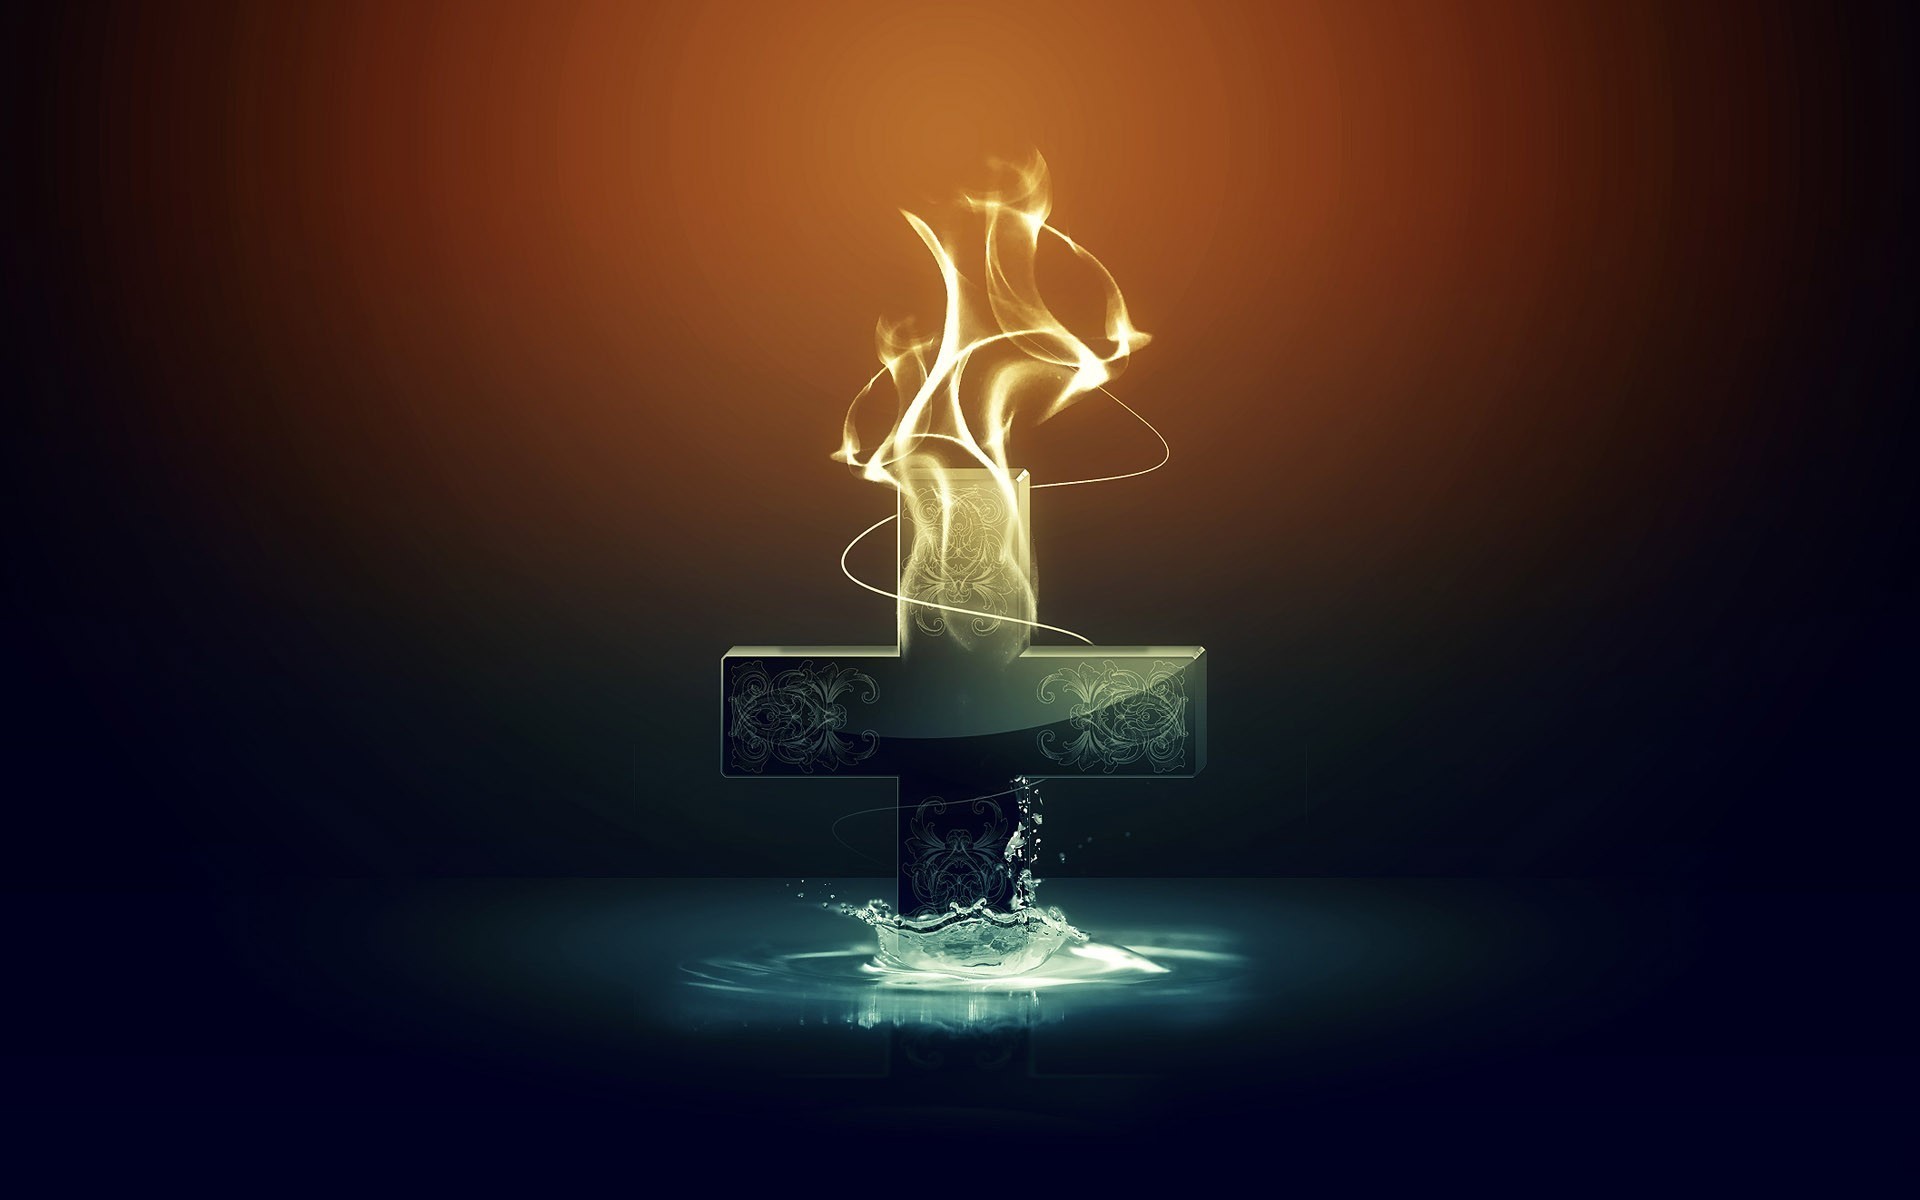 crosses, fire, water, background images